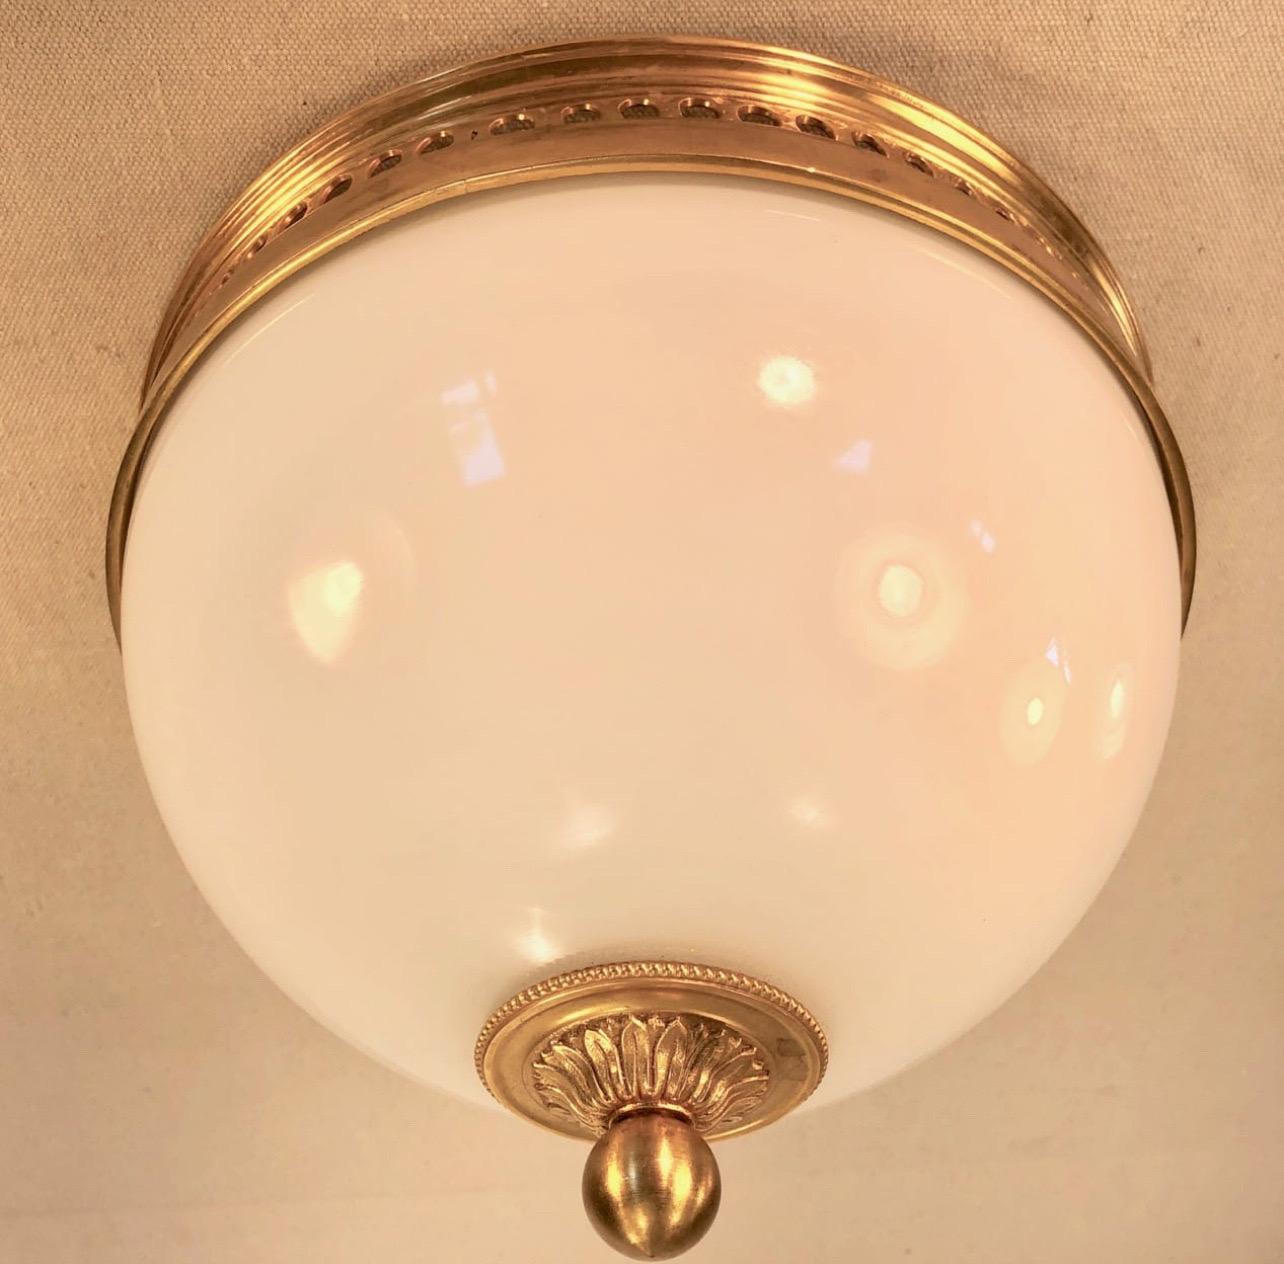 Wonderful Sherle Wagner Polished Brass White Glass Regency Flush Mount Fixtures In Good Condition For Sale In Roslyn, NY